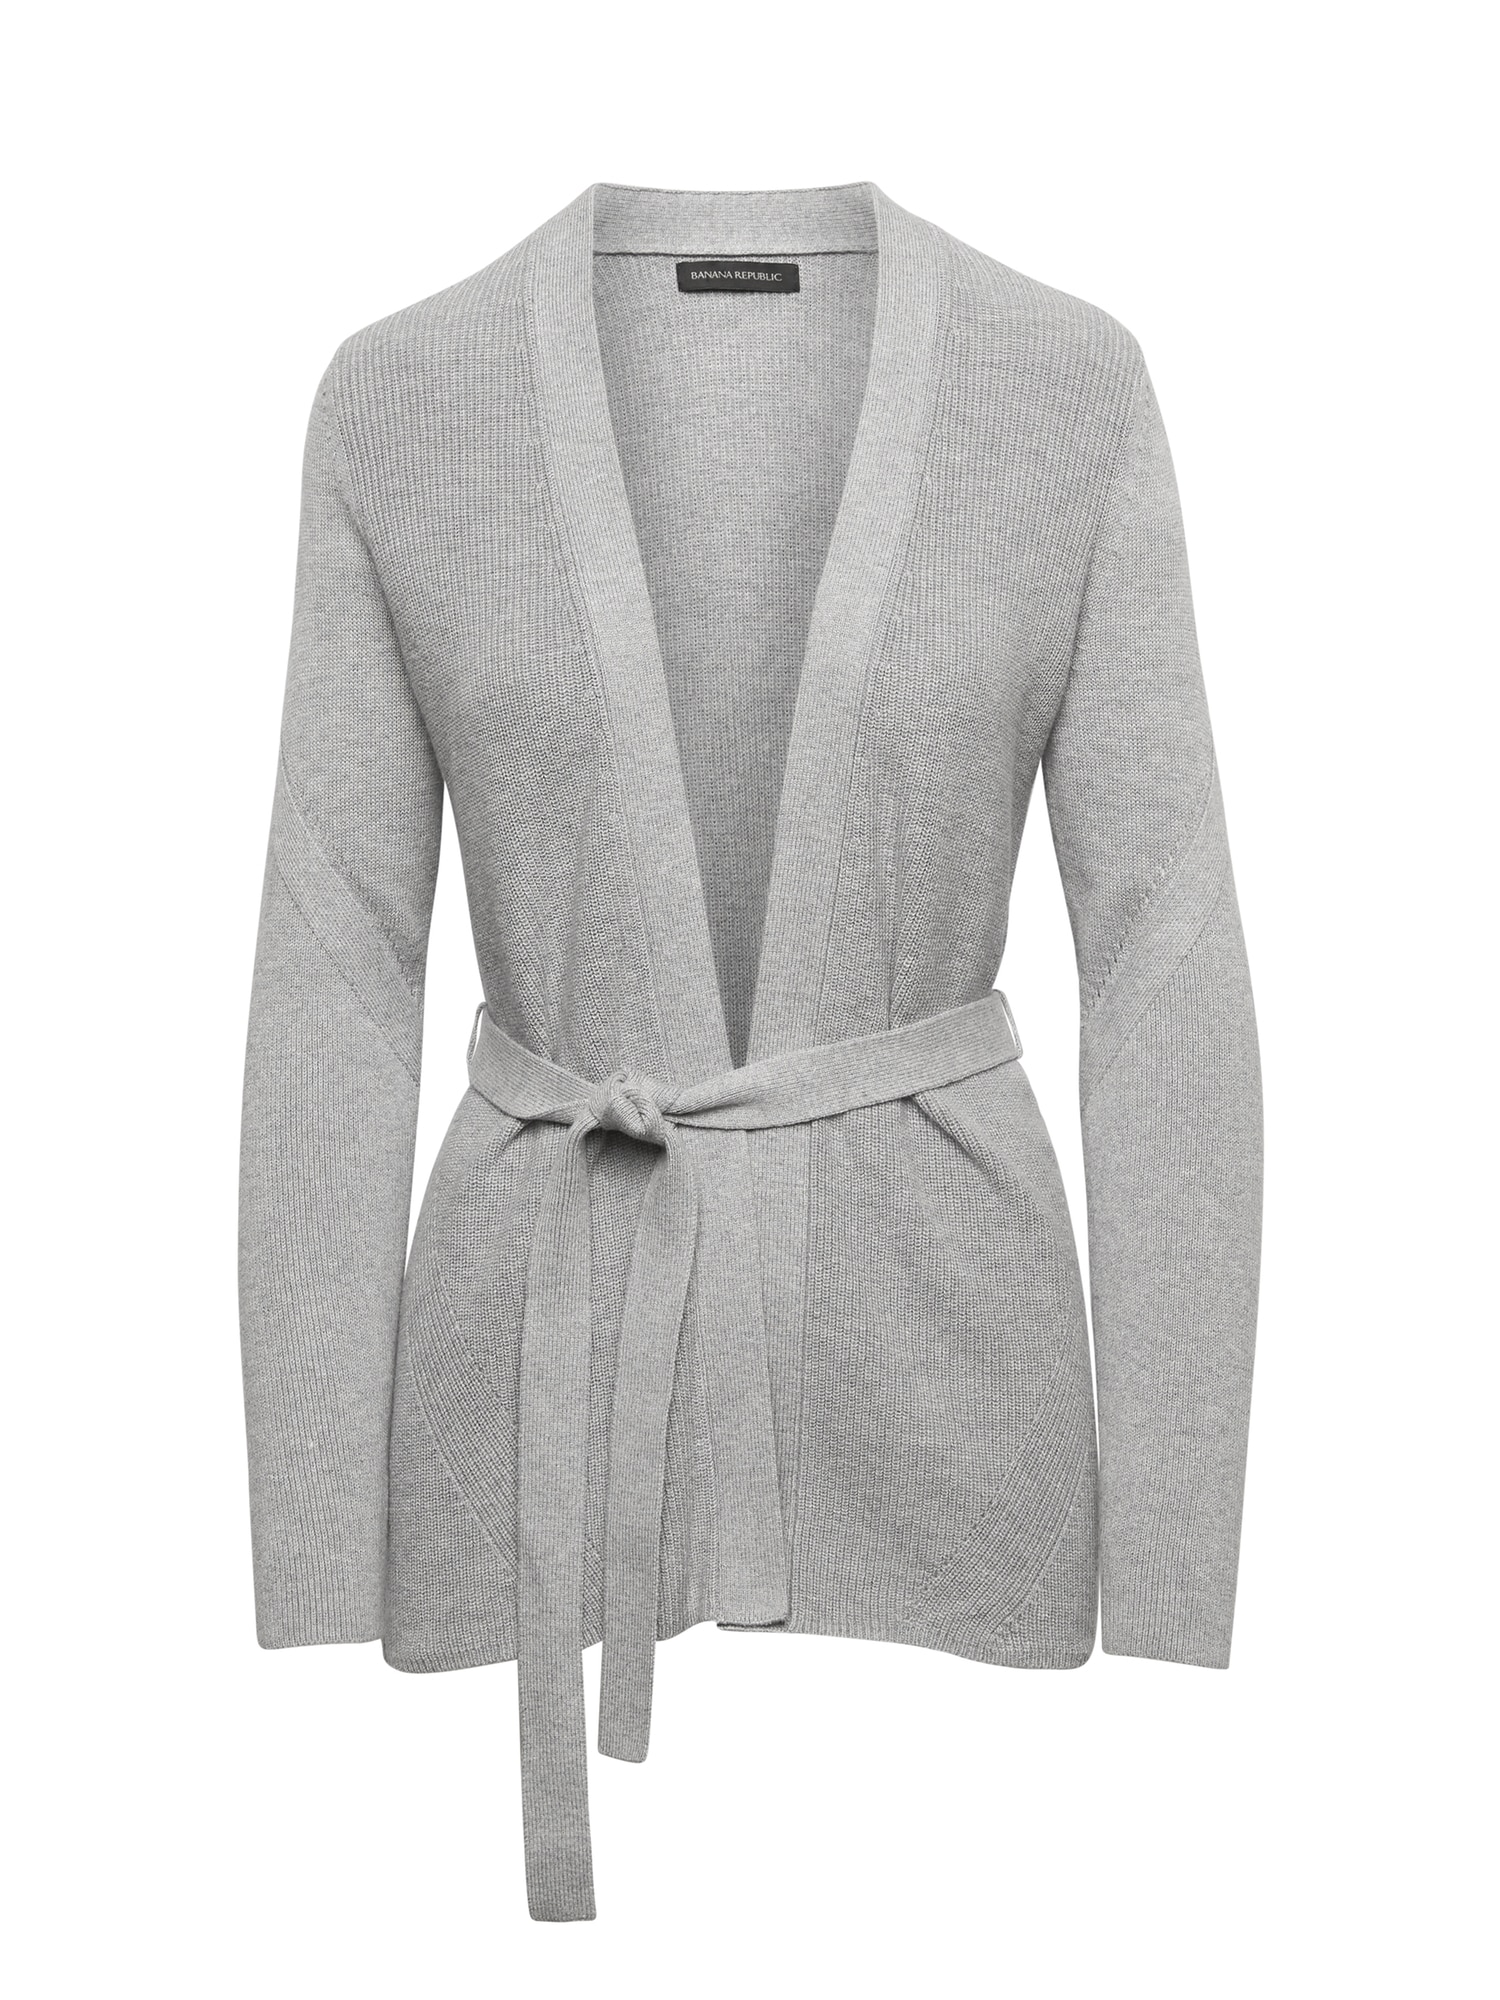 Cotton-Blend Ribbed Cardigan Sweater with Belt | Banana Republic